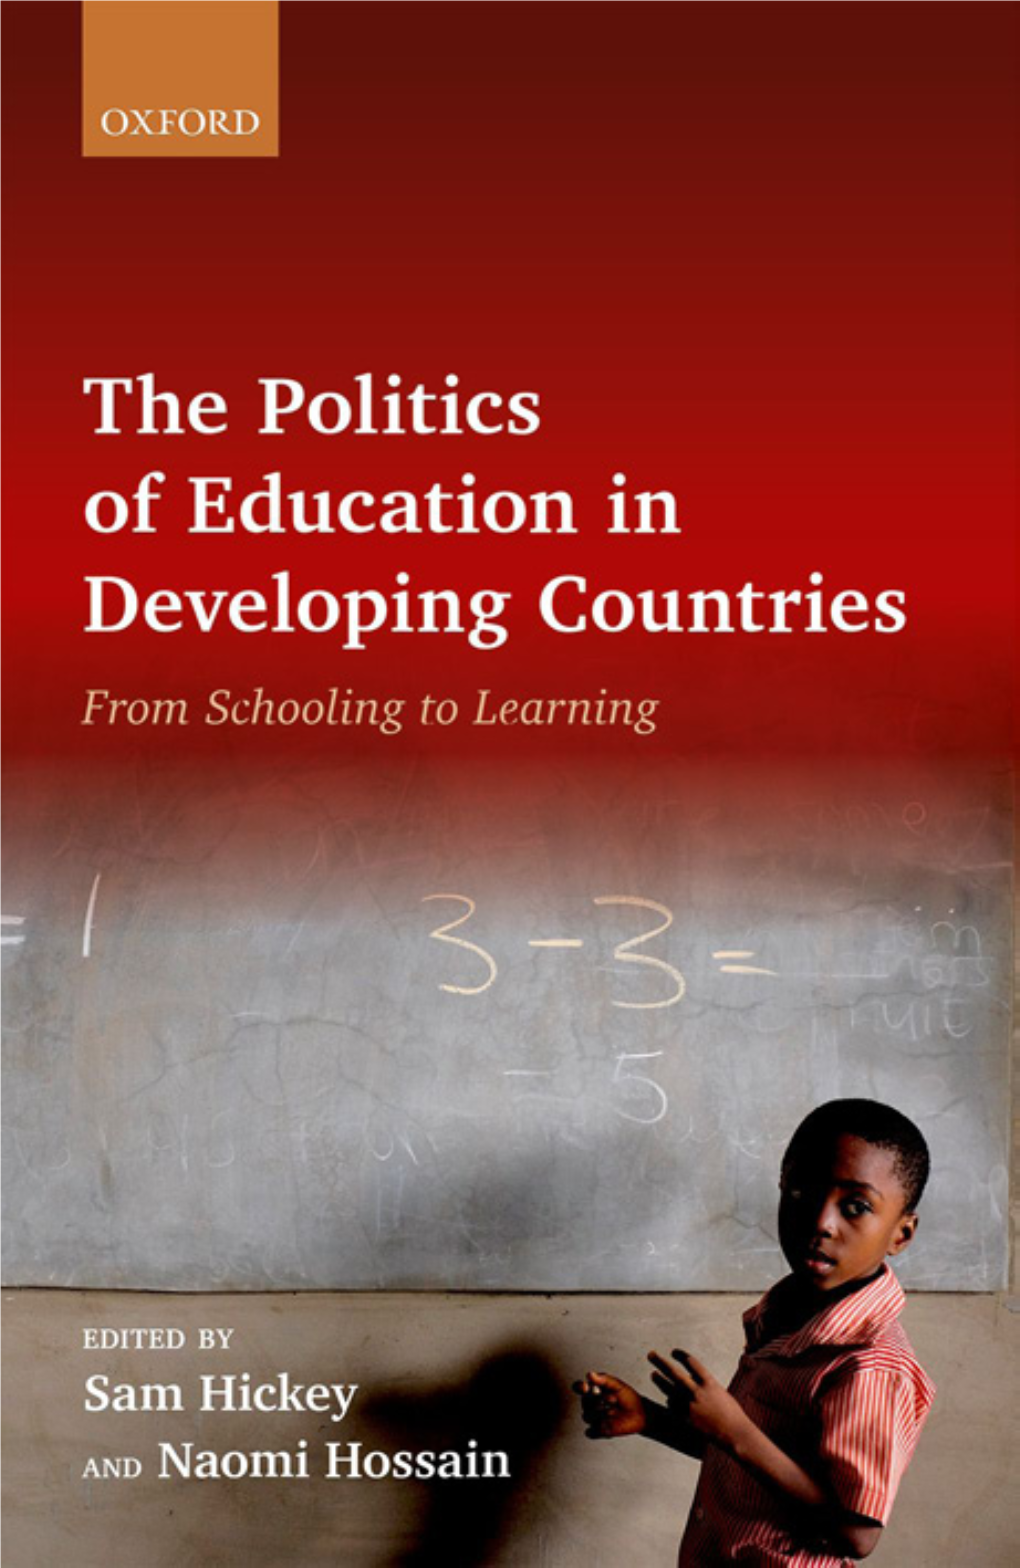 The Politics of Education in Developing Countries OUP CORRECTED PROOF – FINAL, 5/2/2019, Spi OUP CORRECTED PROOF – FINAL, 5/2/2019, Spi